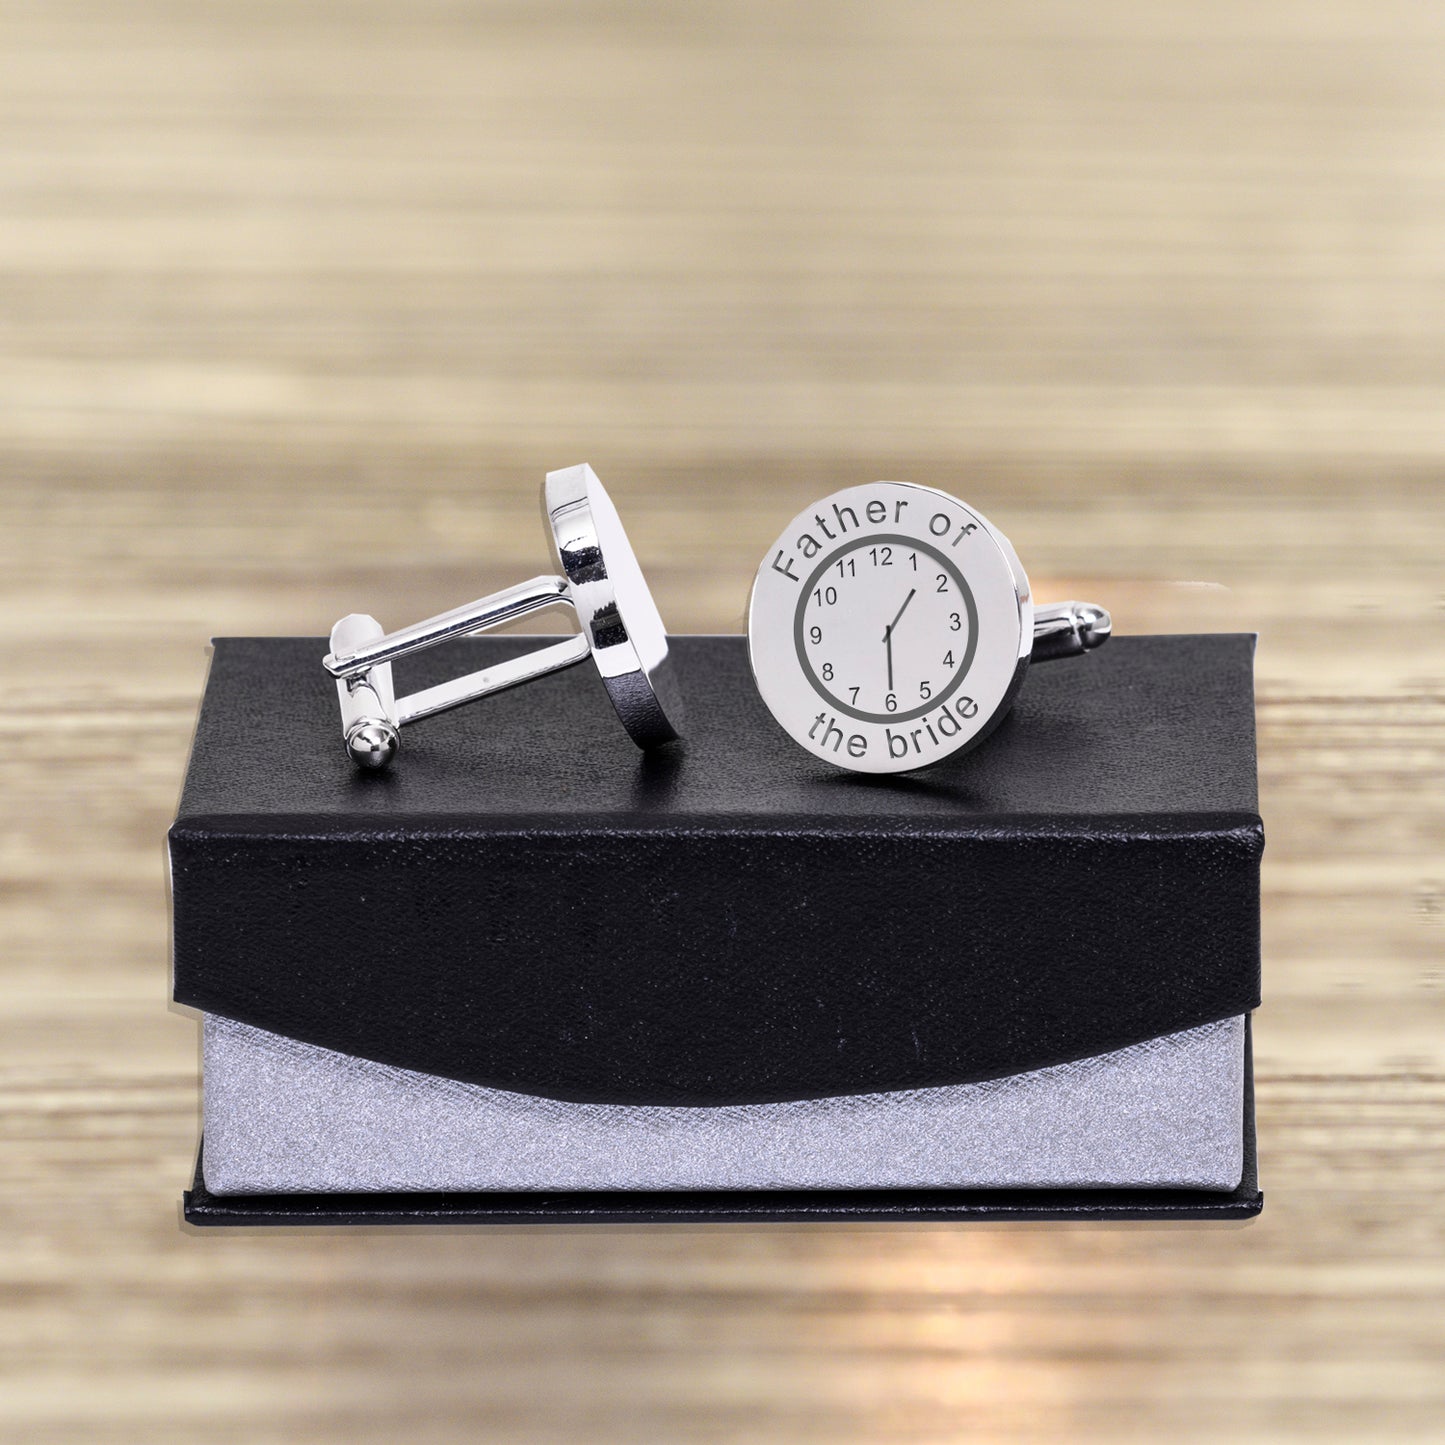 Personalised Any Message & Time Cufflinks - PCS Cufflinks & Gifts